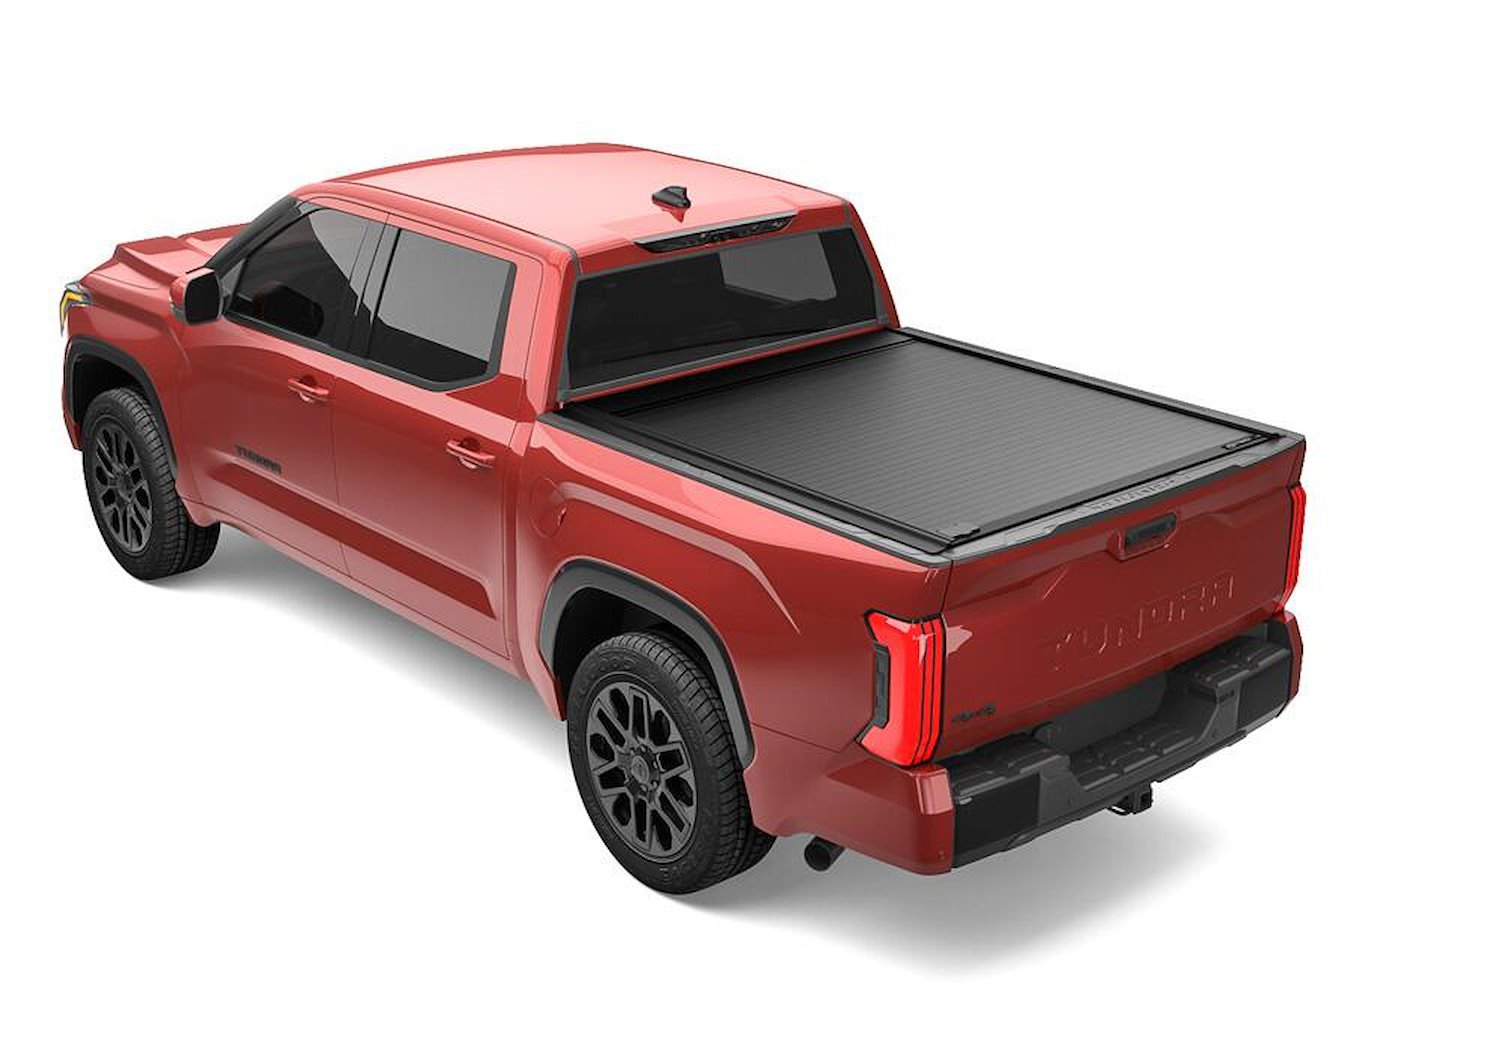 60863 RetraxOne MX Retractable Tonneau Cover Fits Select Toyota Tundra Regular/Double Cab 6' 7" Bed with Deck Rail System